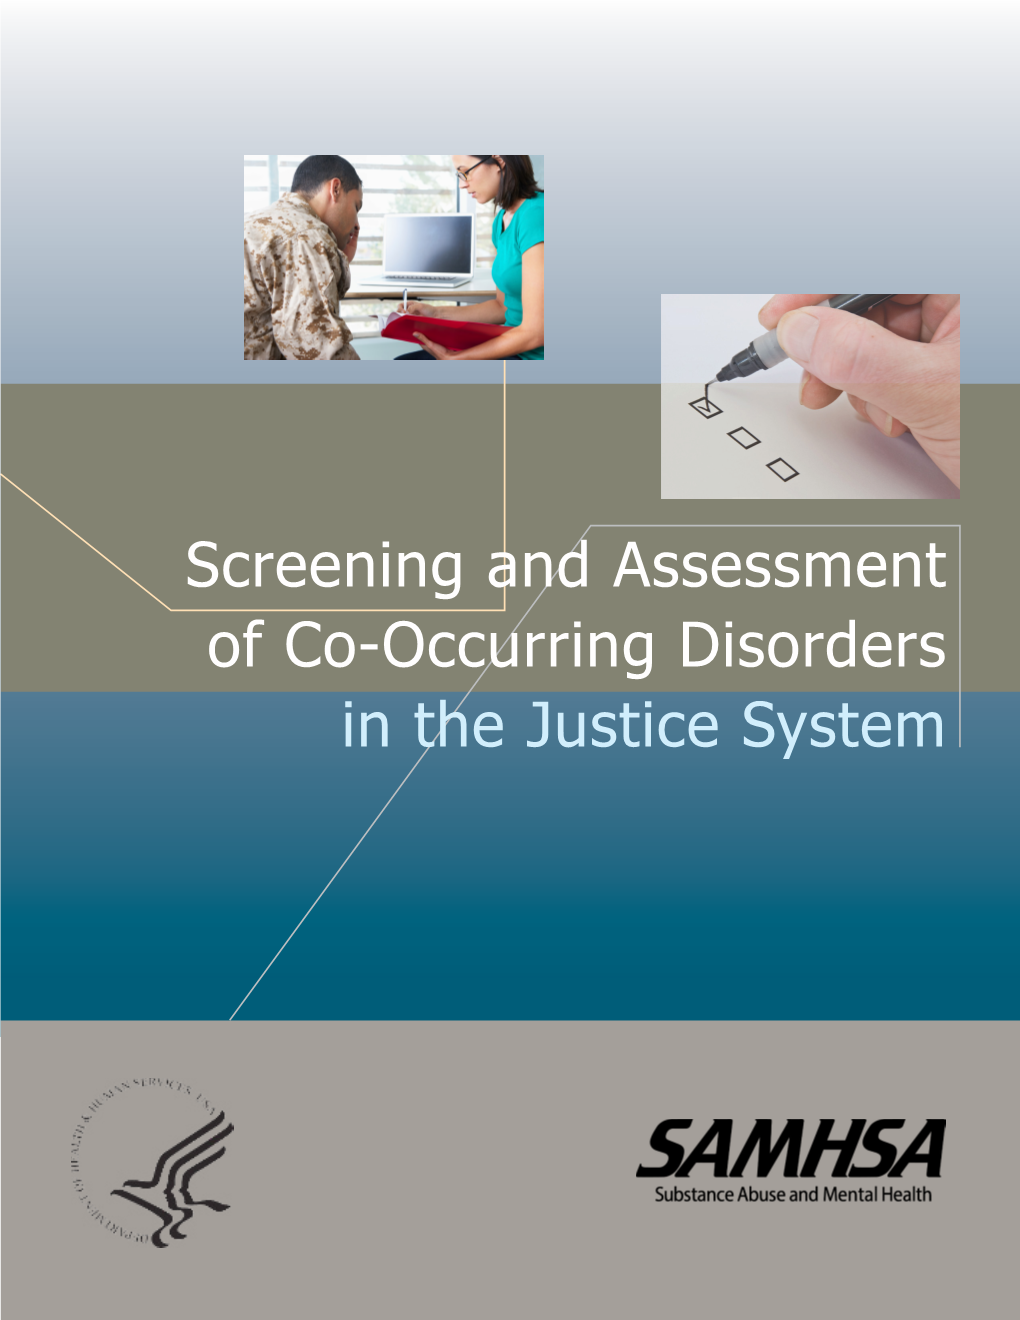 Screening and Assessment of Co-Occuring Disorders in the Justice System